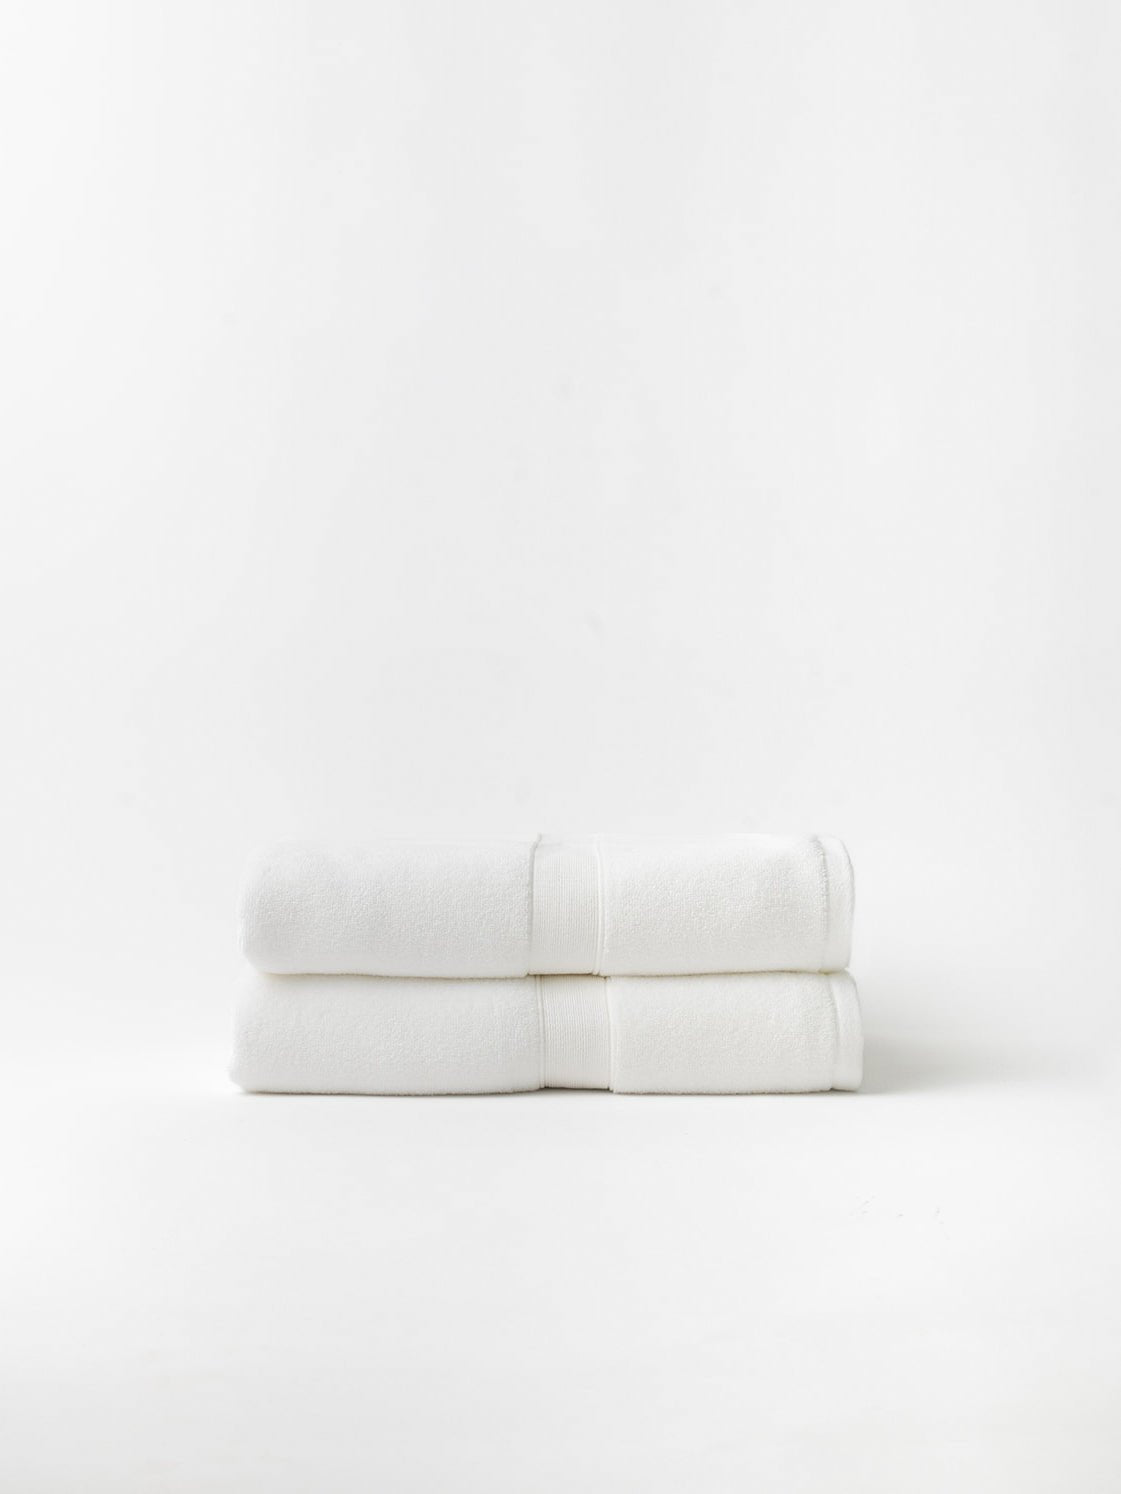 Two luxe bath sheets folded with white background |Color:White